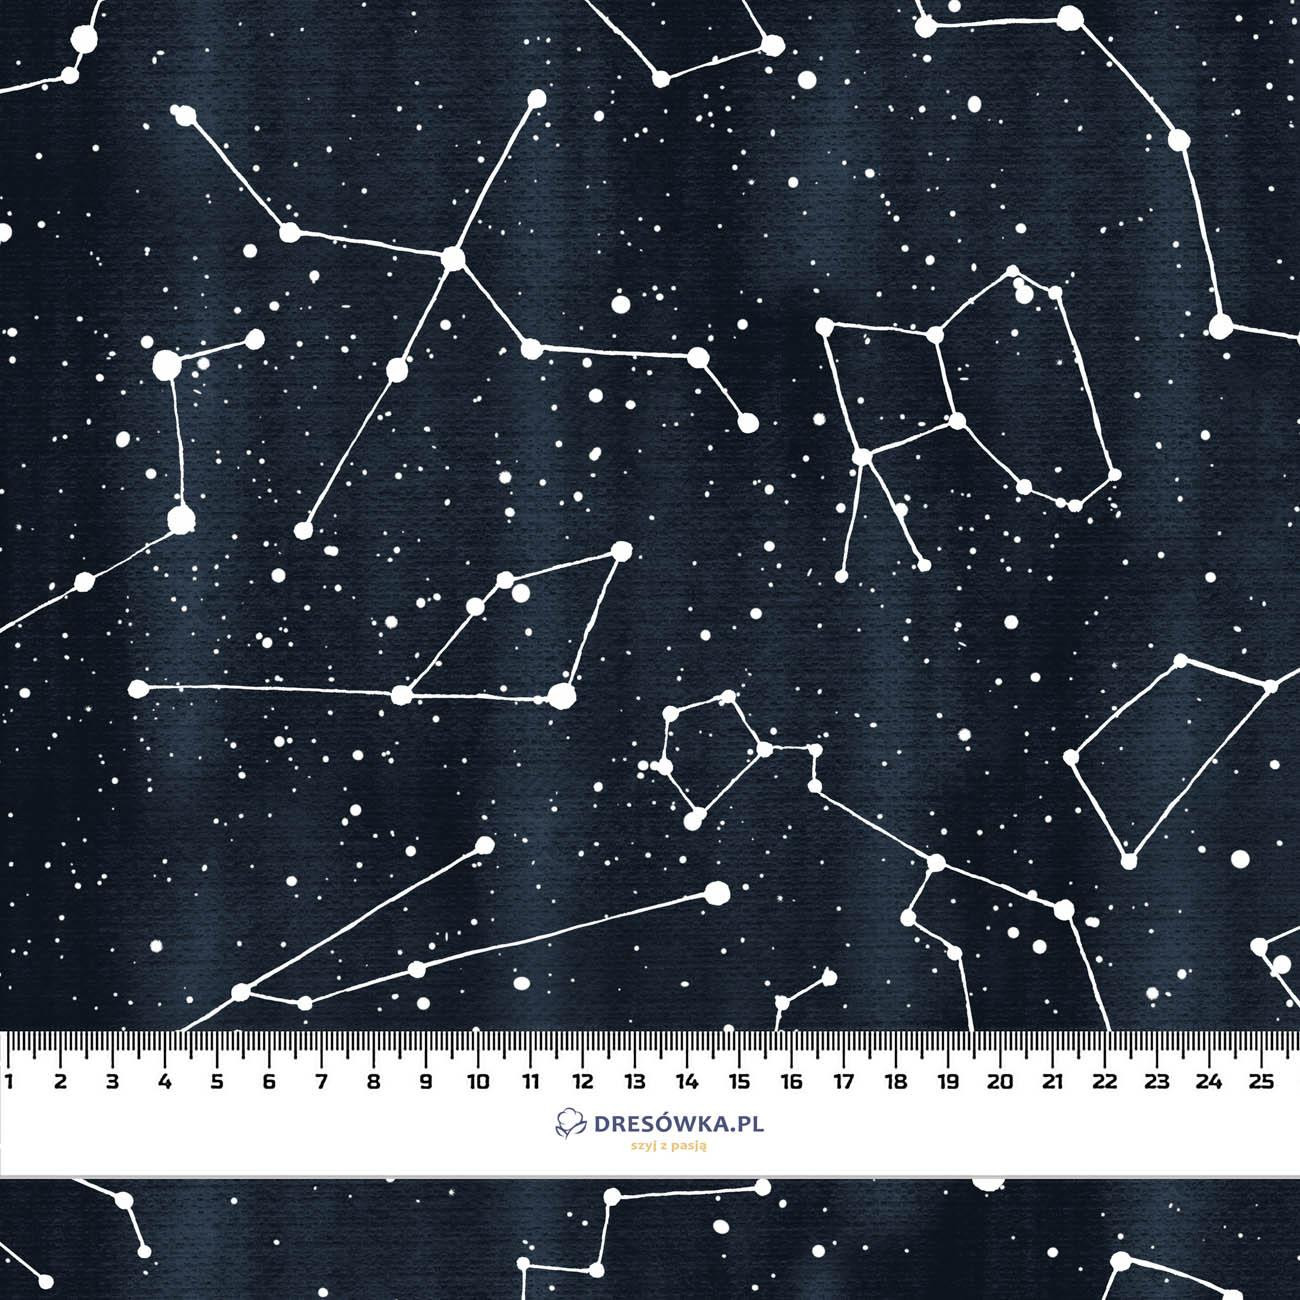 CONSTELLATIONS pat. 2 (GALACTIC ANIMALS) / navy - looped knit fabric with elastane ITY